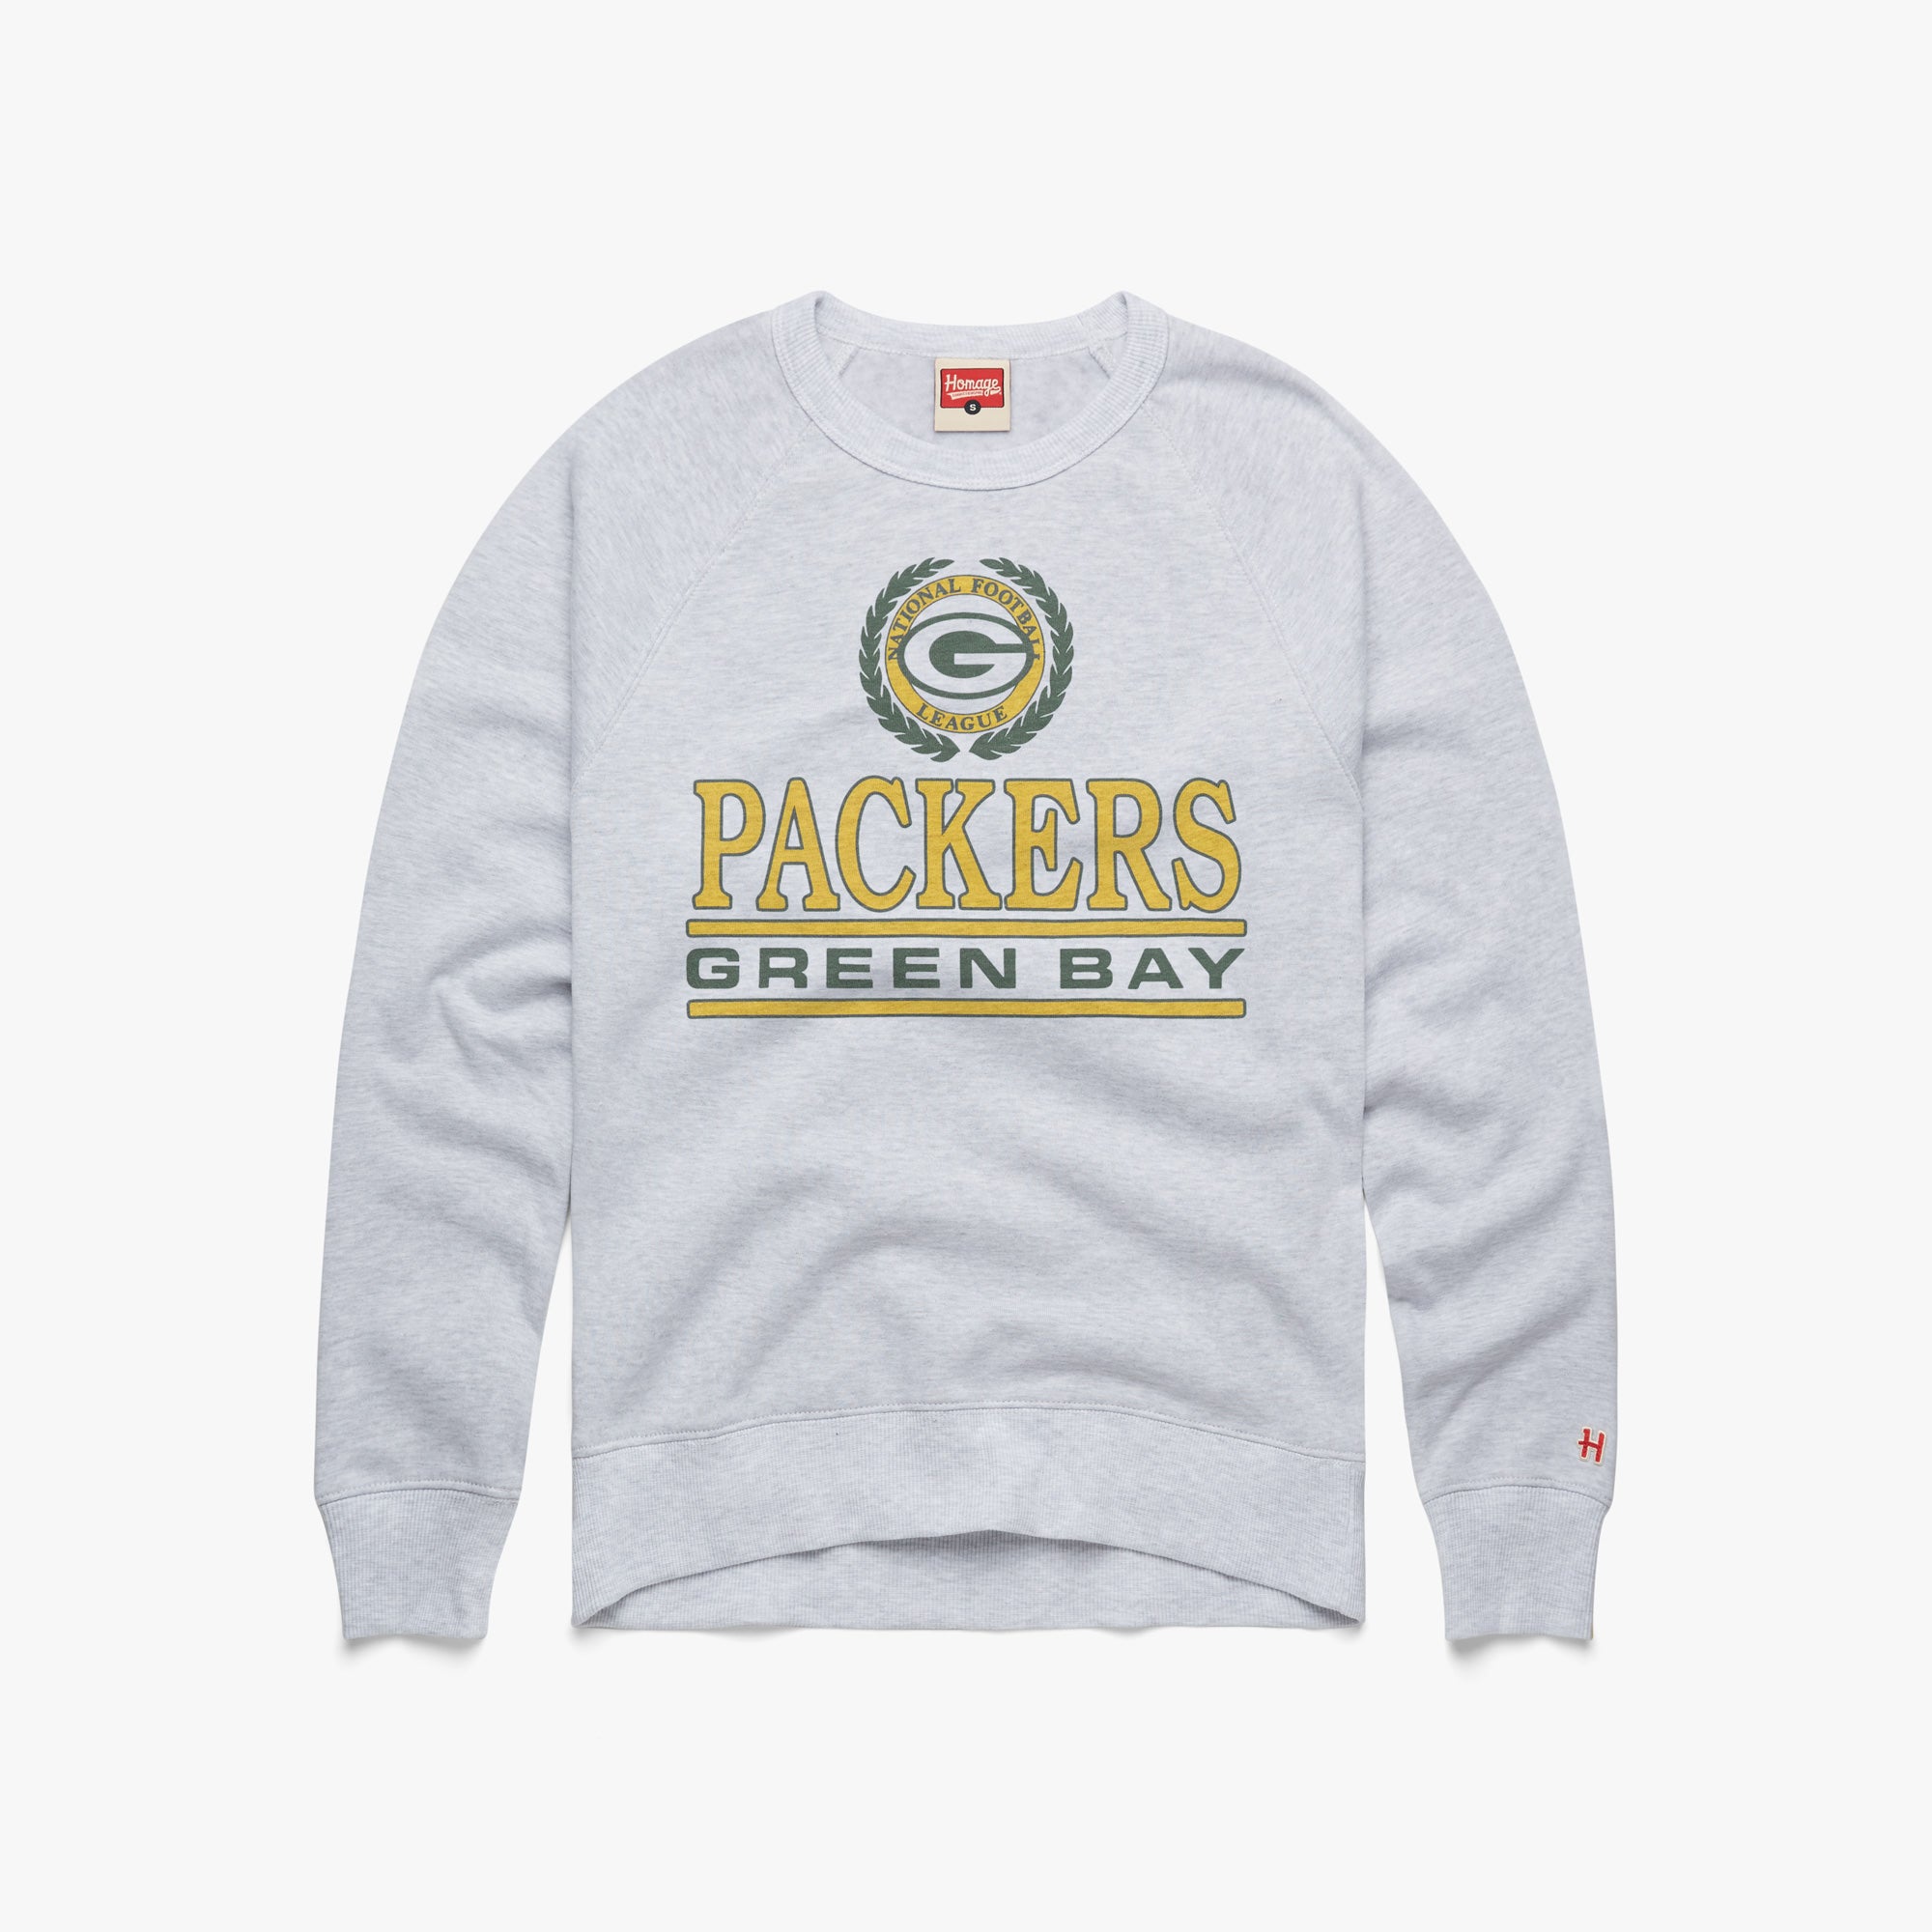 Green Bay Packers Crest Crewneck from Homage. | Officially Licensed Vintage NFL Apparel from Homage Pro Shop.